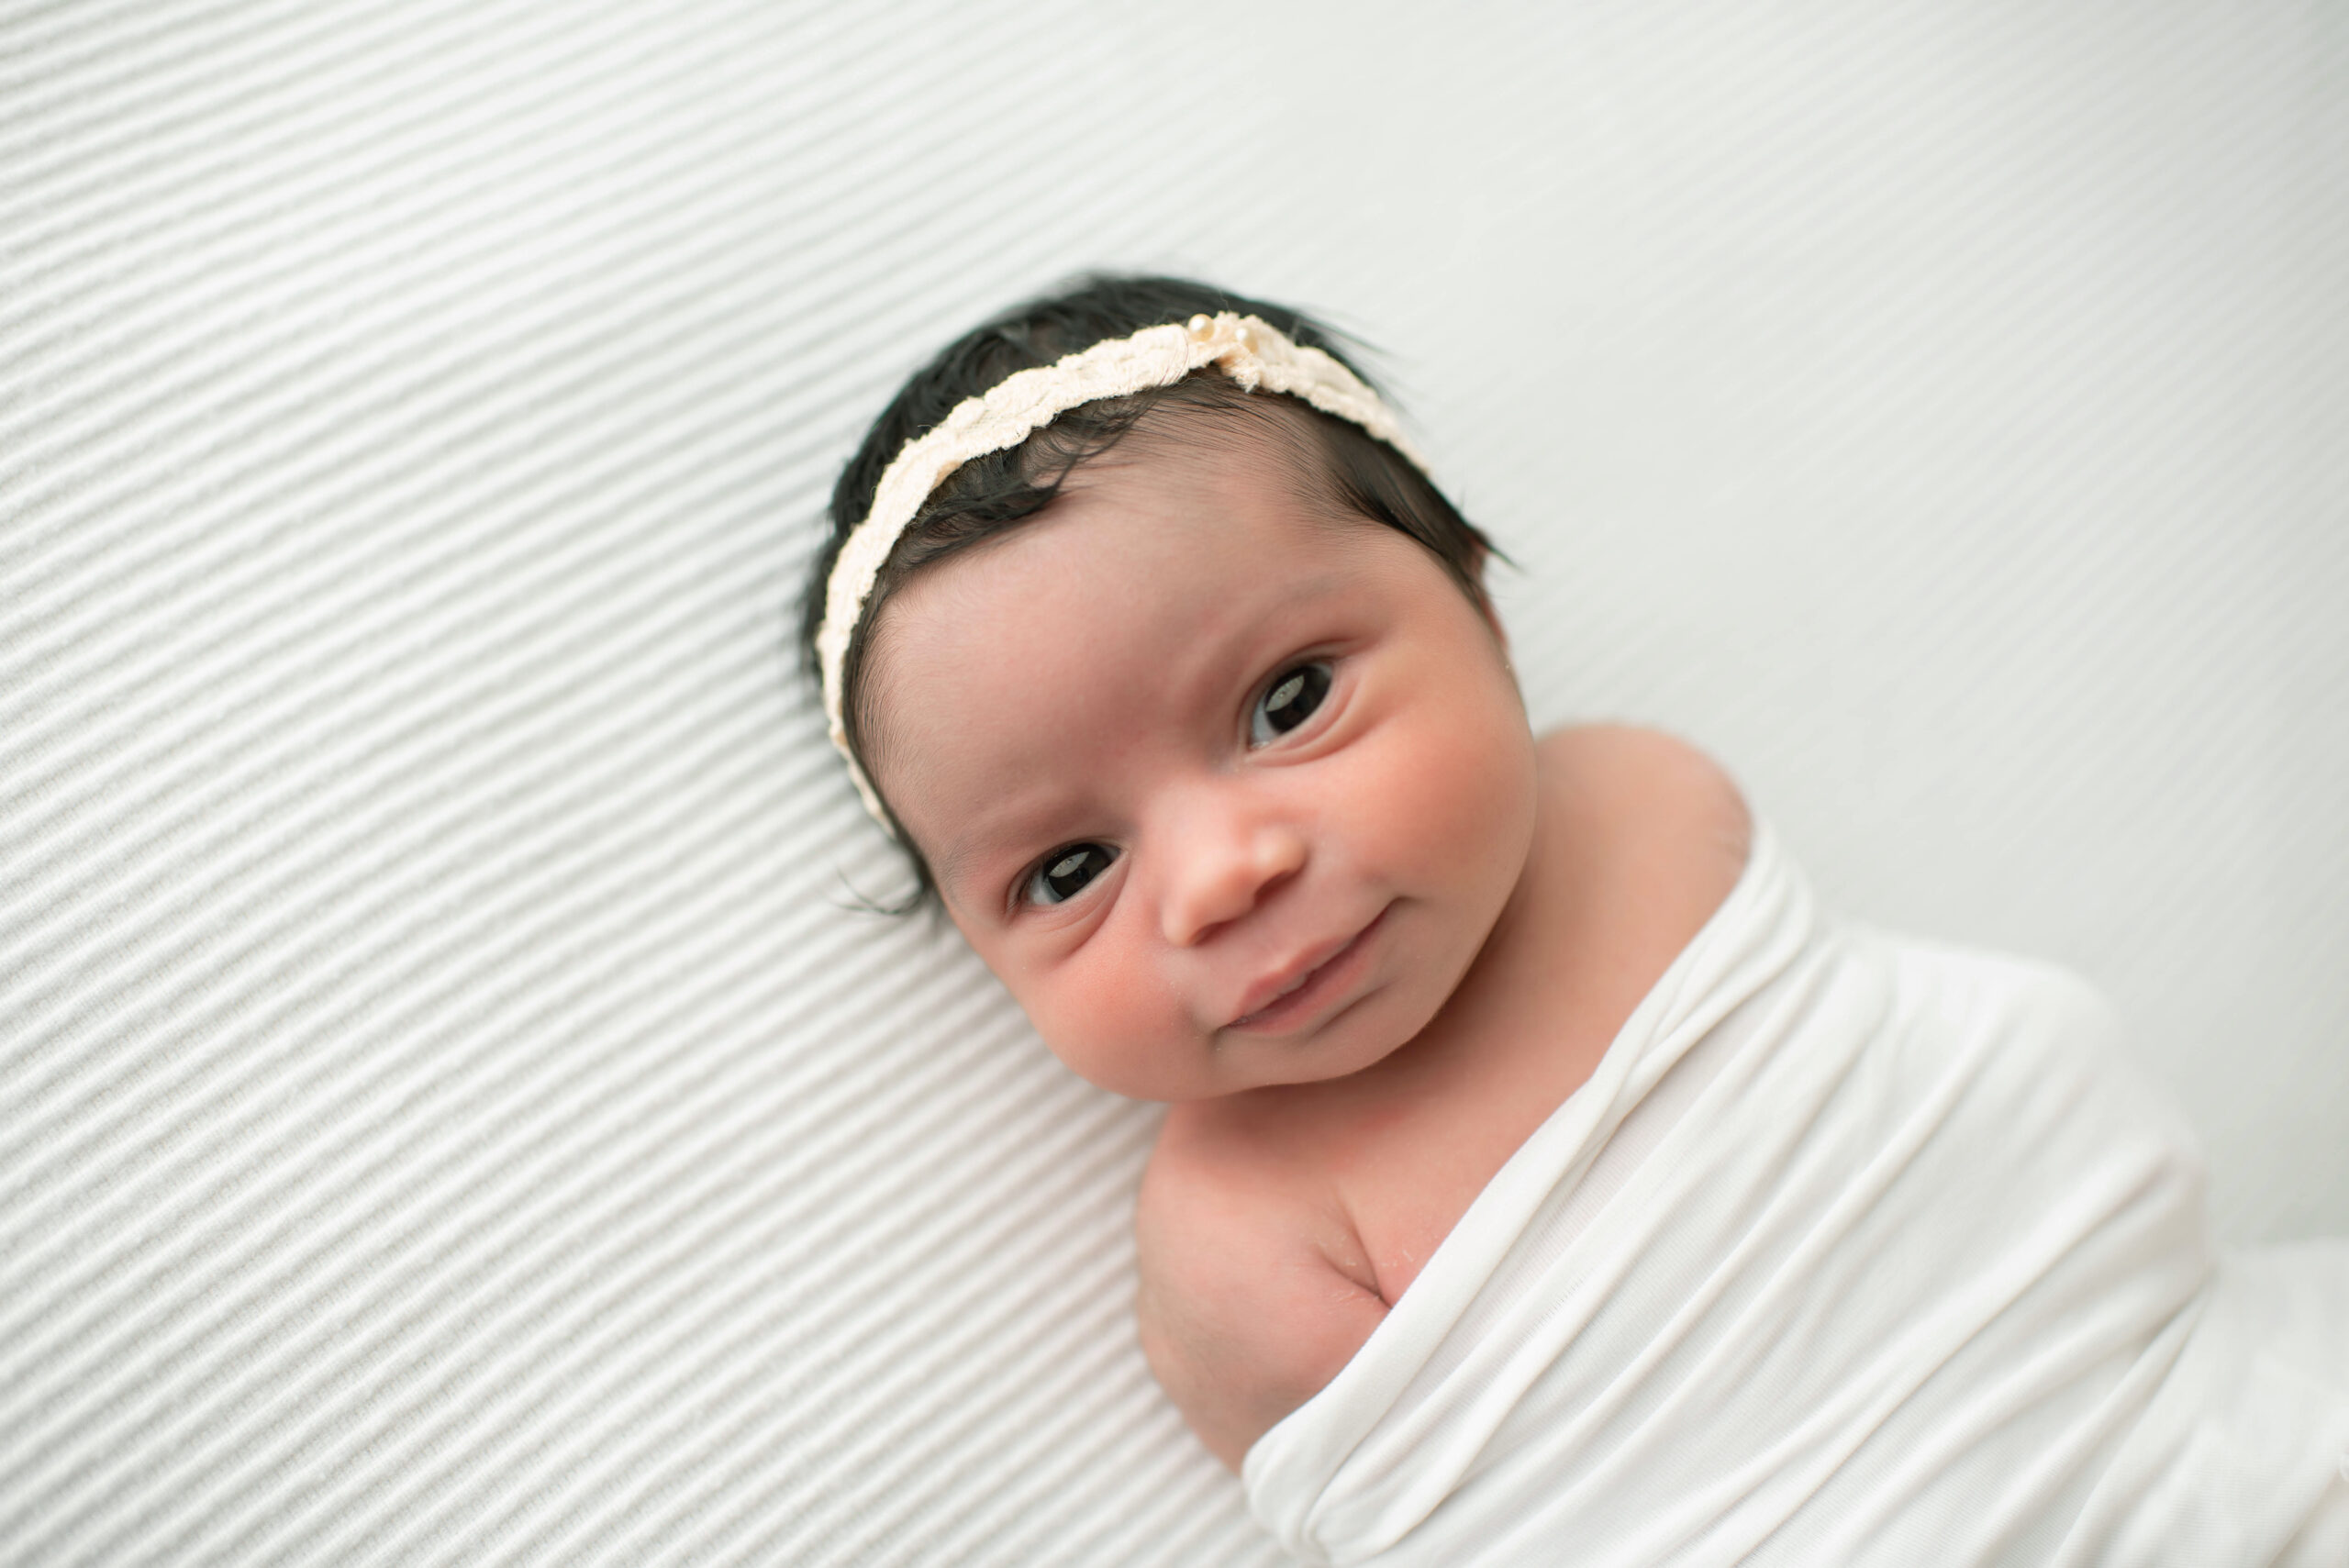 A newborn baby lays on a white bed in a headband